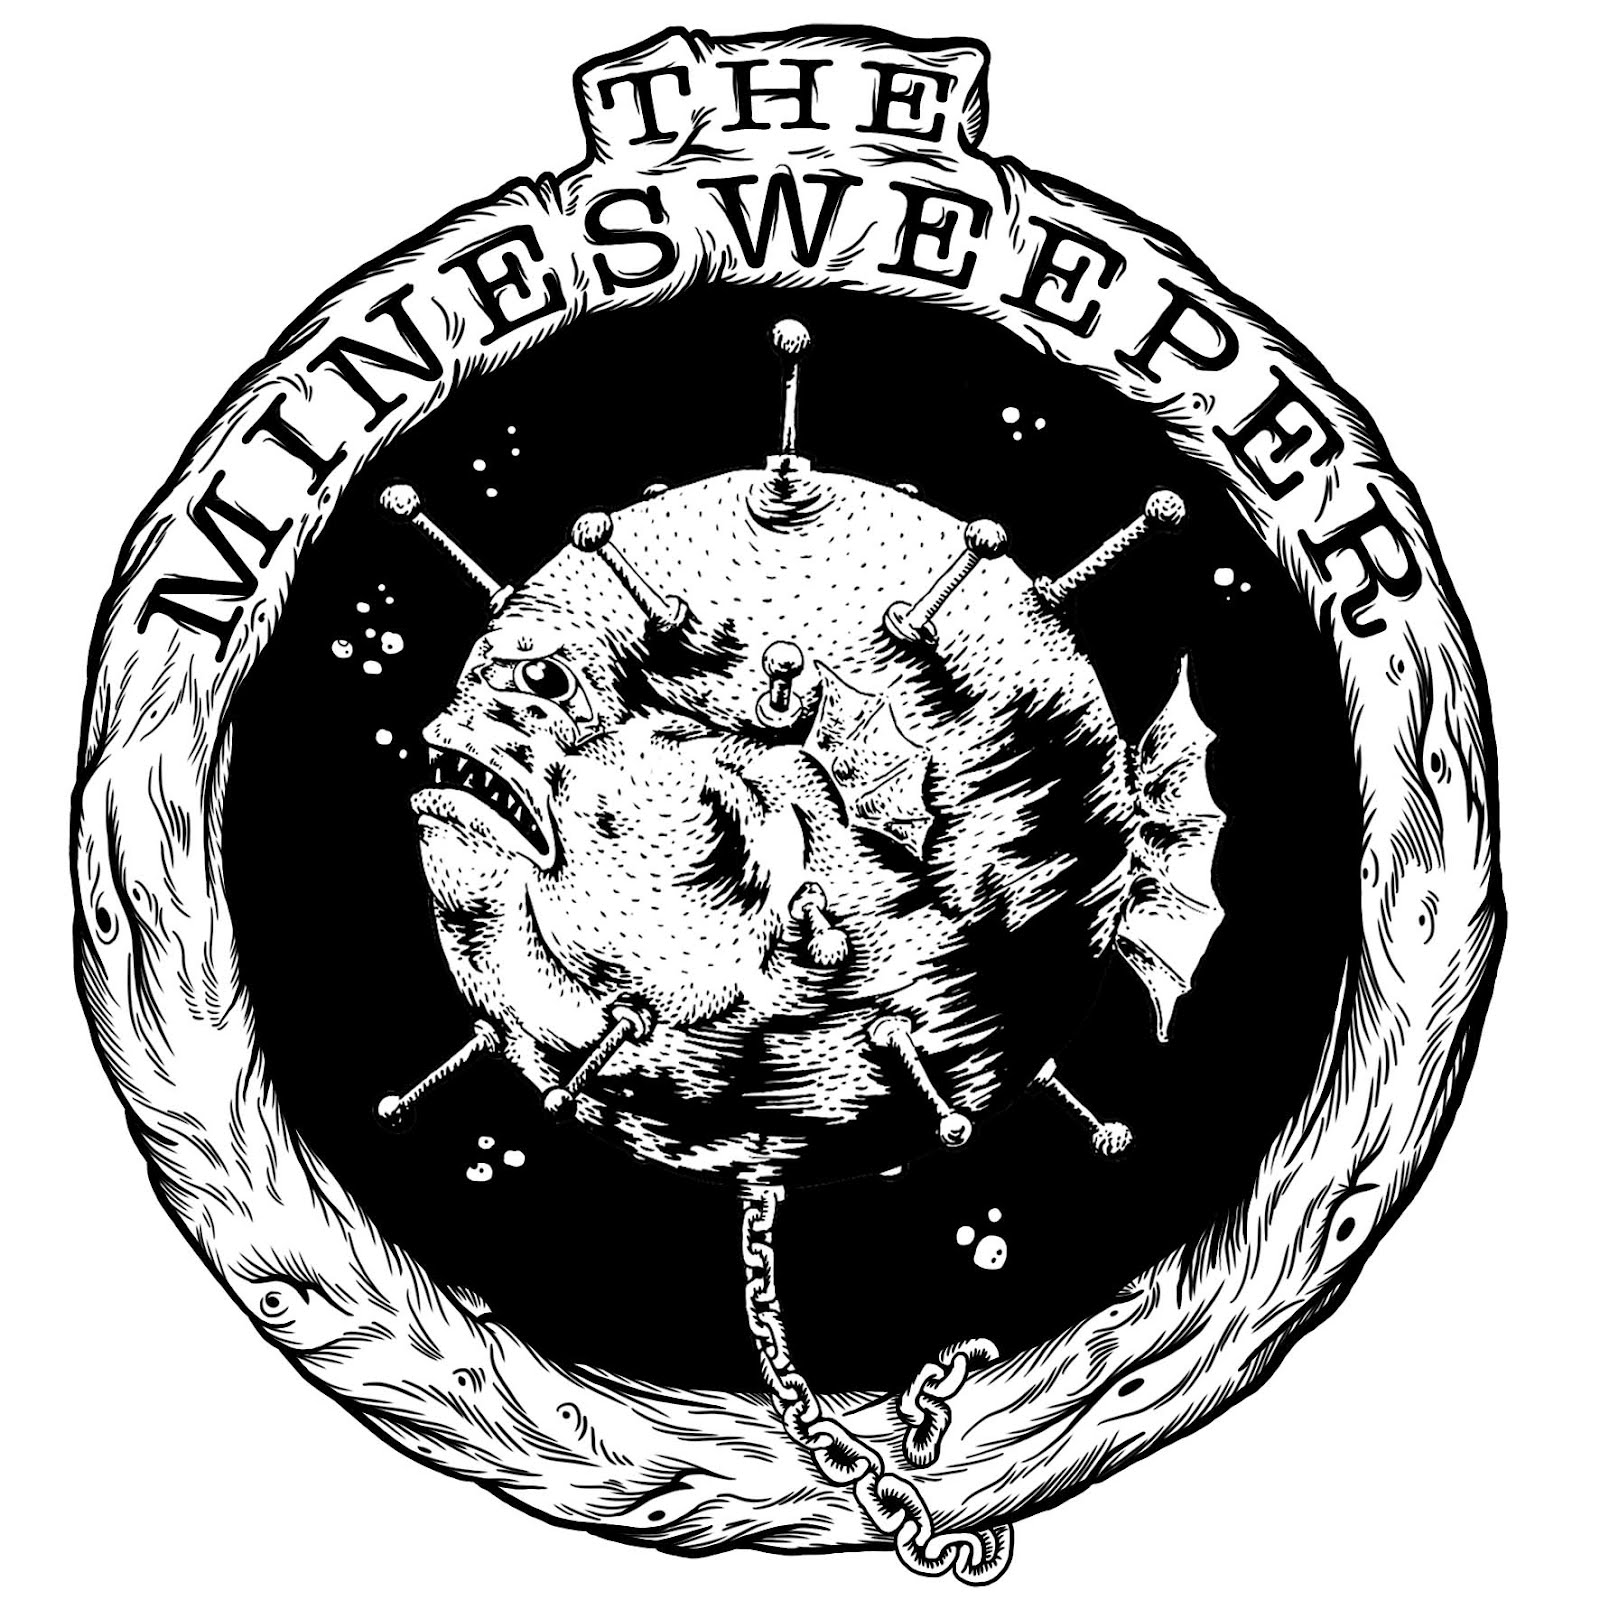 THE MINESWEEPER